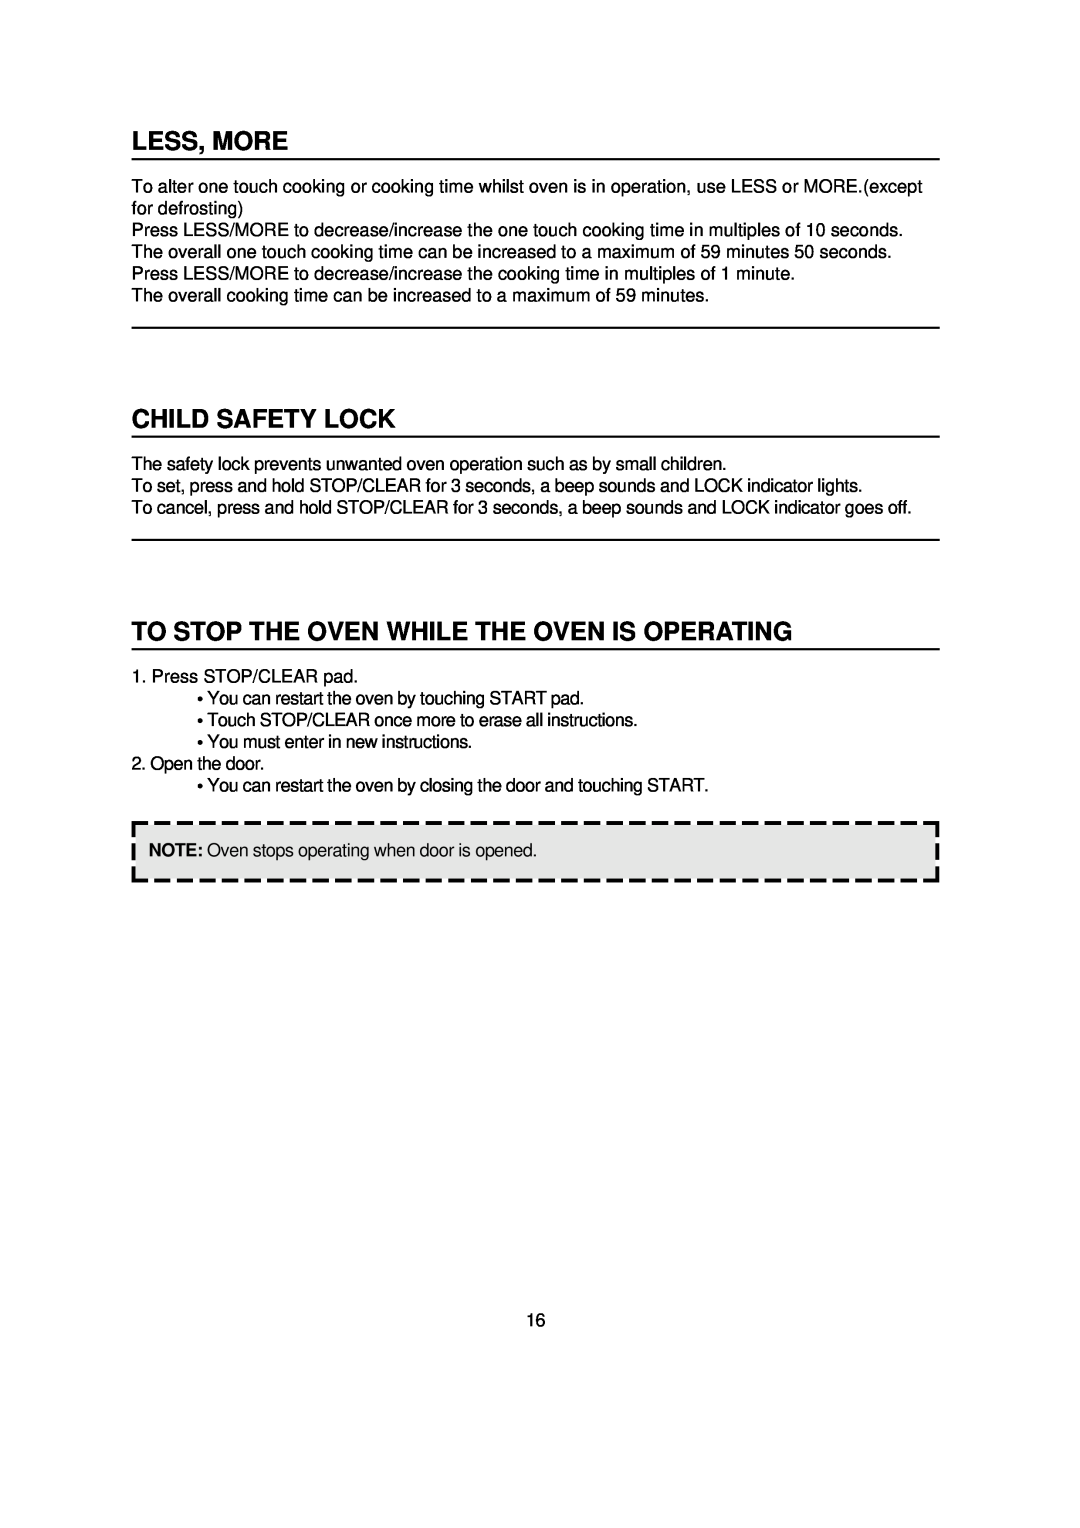 Magic Chef MCD990ARS instruction manual Less, More, Child Safety Lock, To Stop The Oven While The Oven Is Operating 